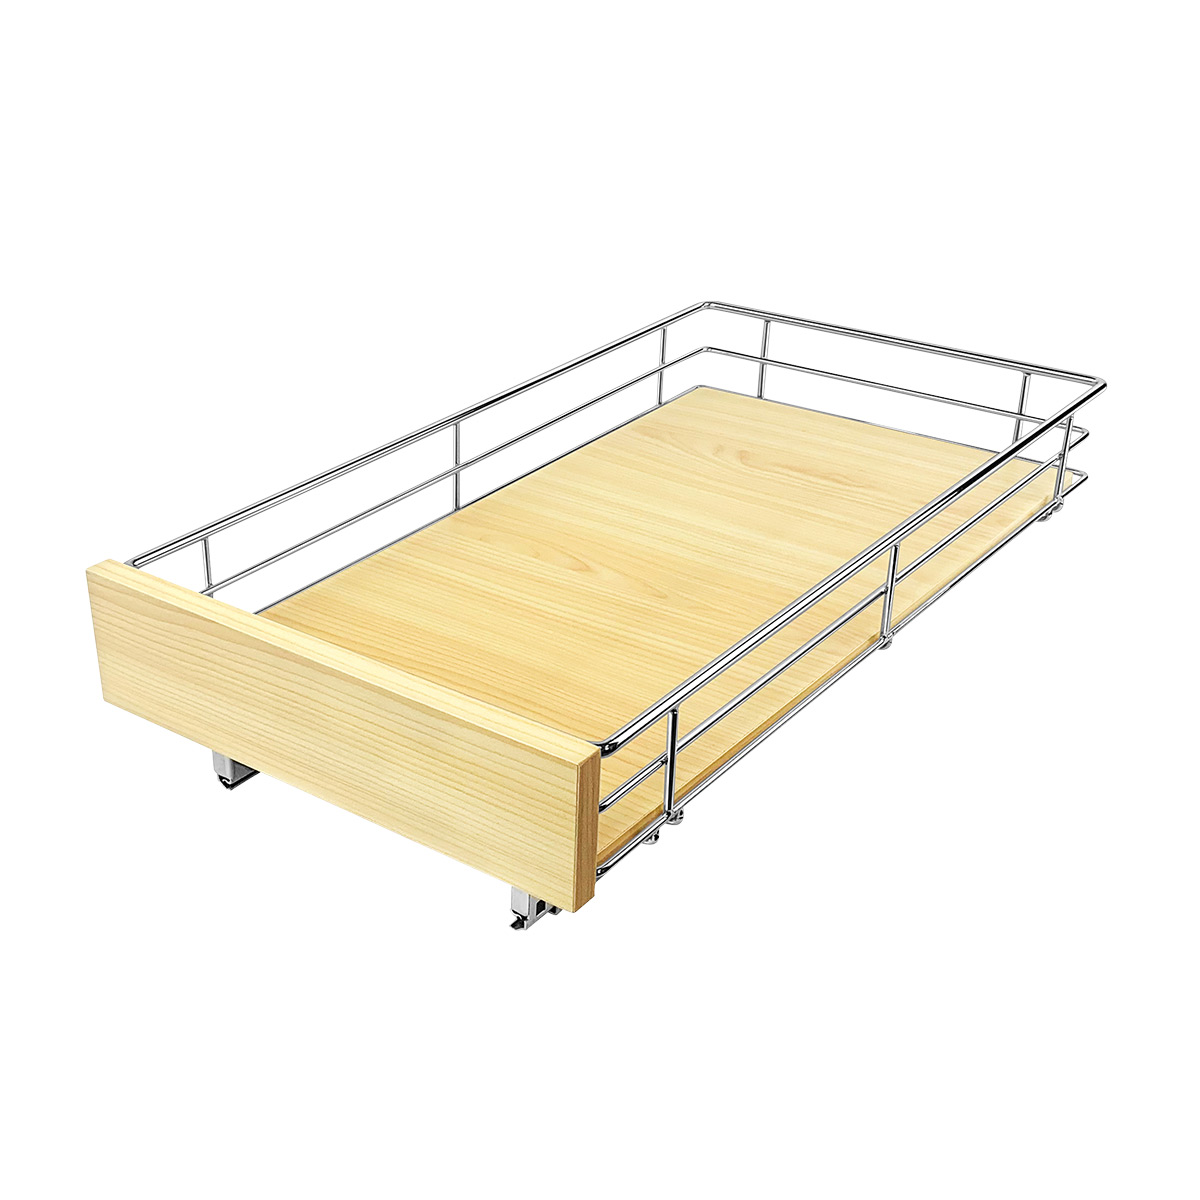 https://www.containerstore.com/catalogimages/364471/10077215-Lynk-Slide-Out-Wood-Drawer-.jpg